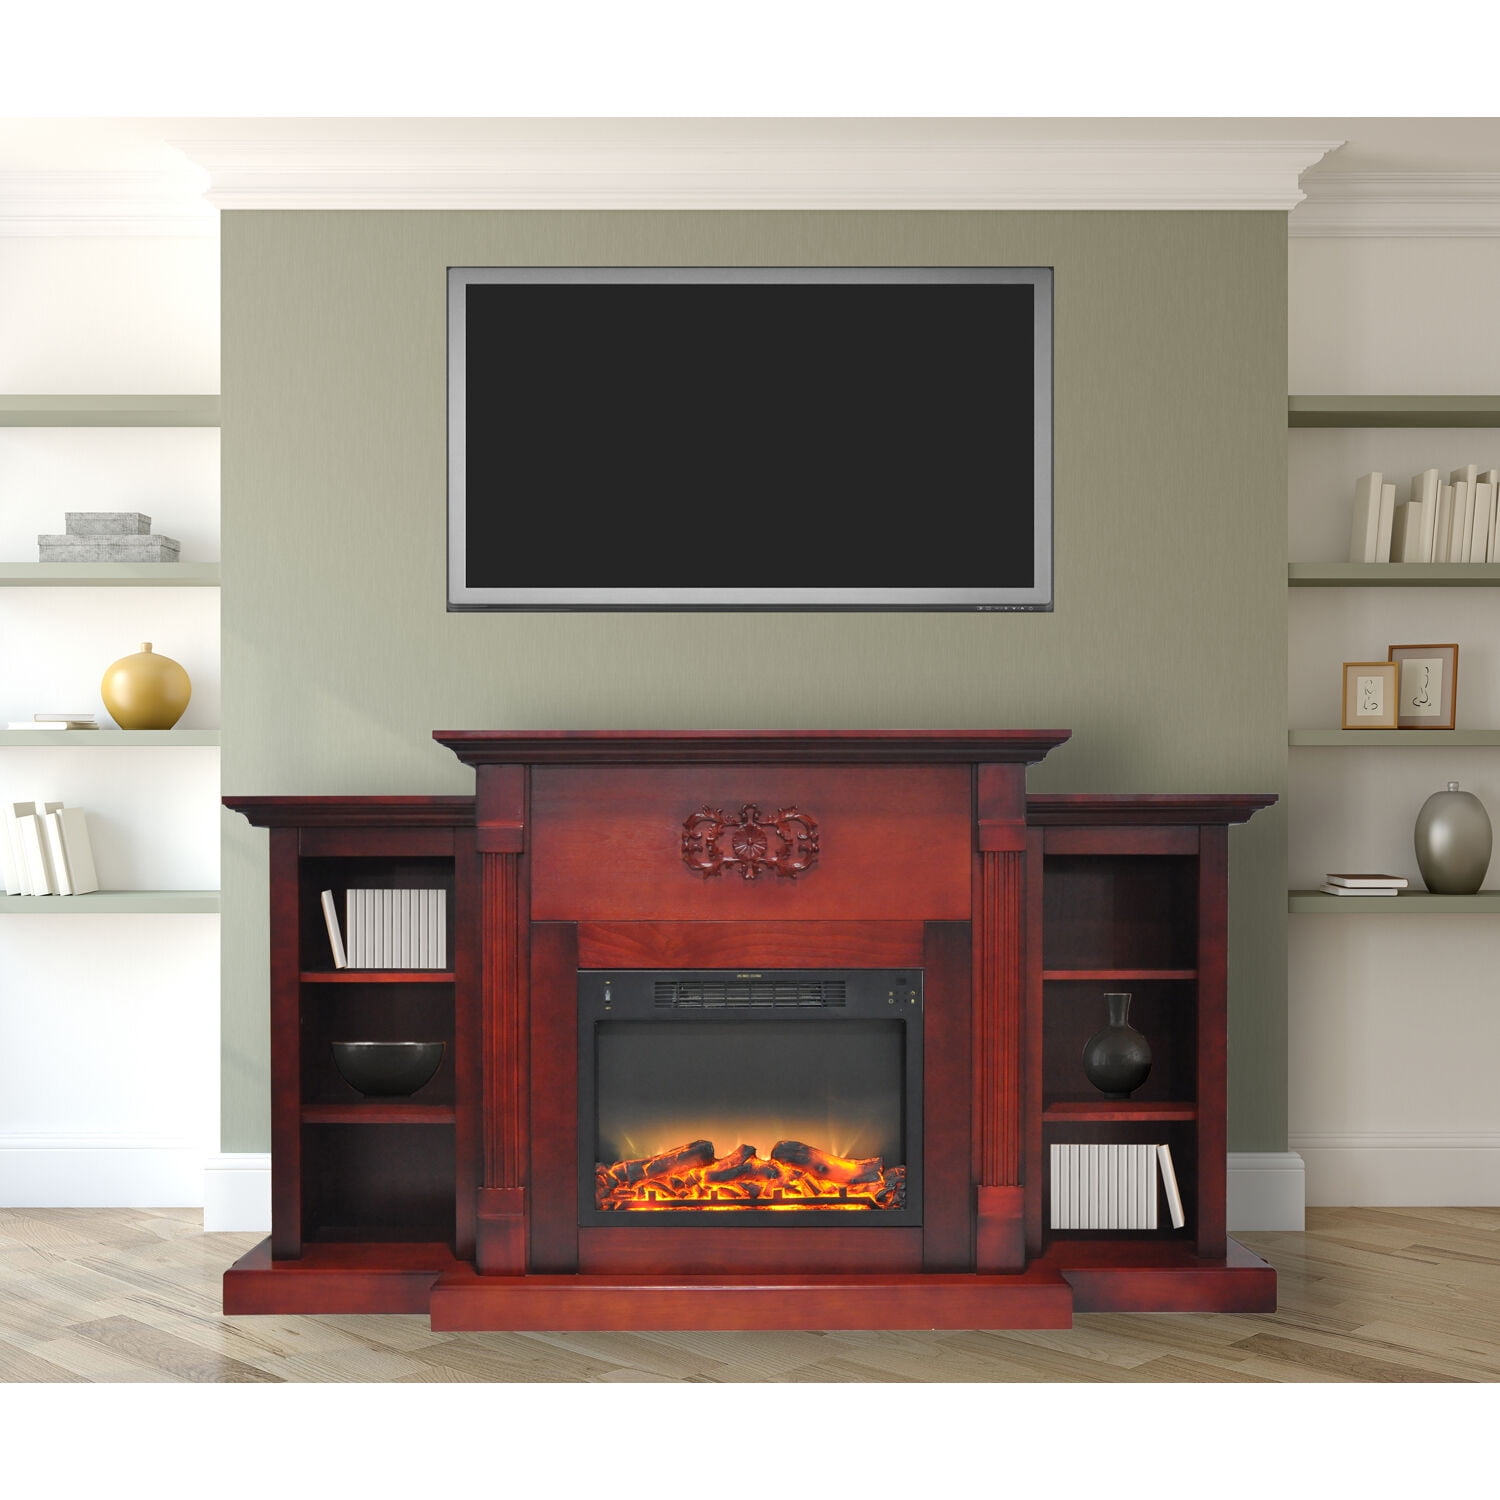 Cambridge Sanoma Electric Fireplace, White Electric Fireplace With Bookshelves